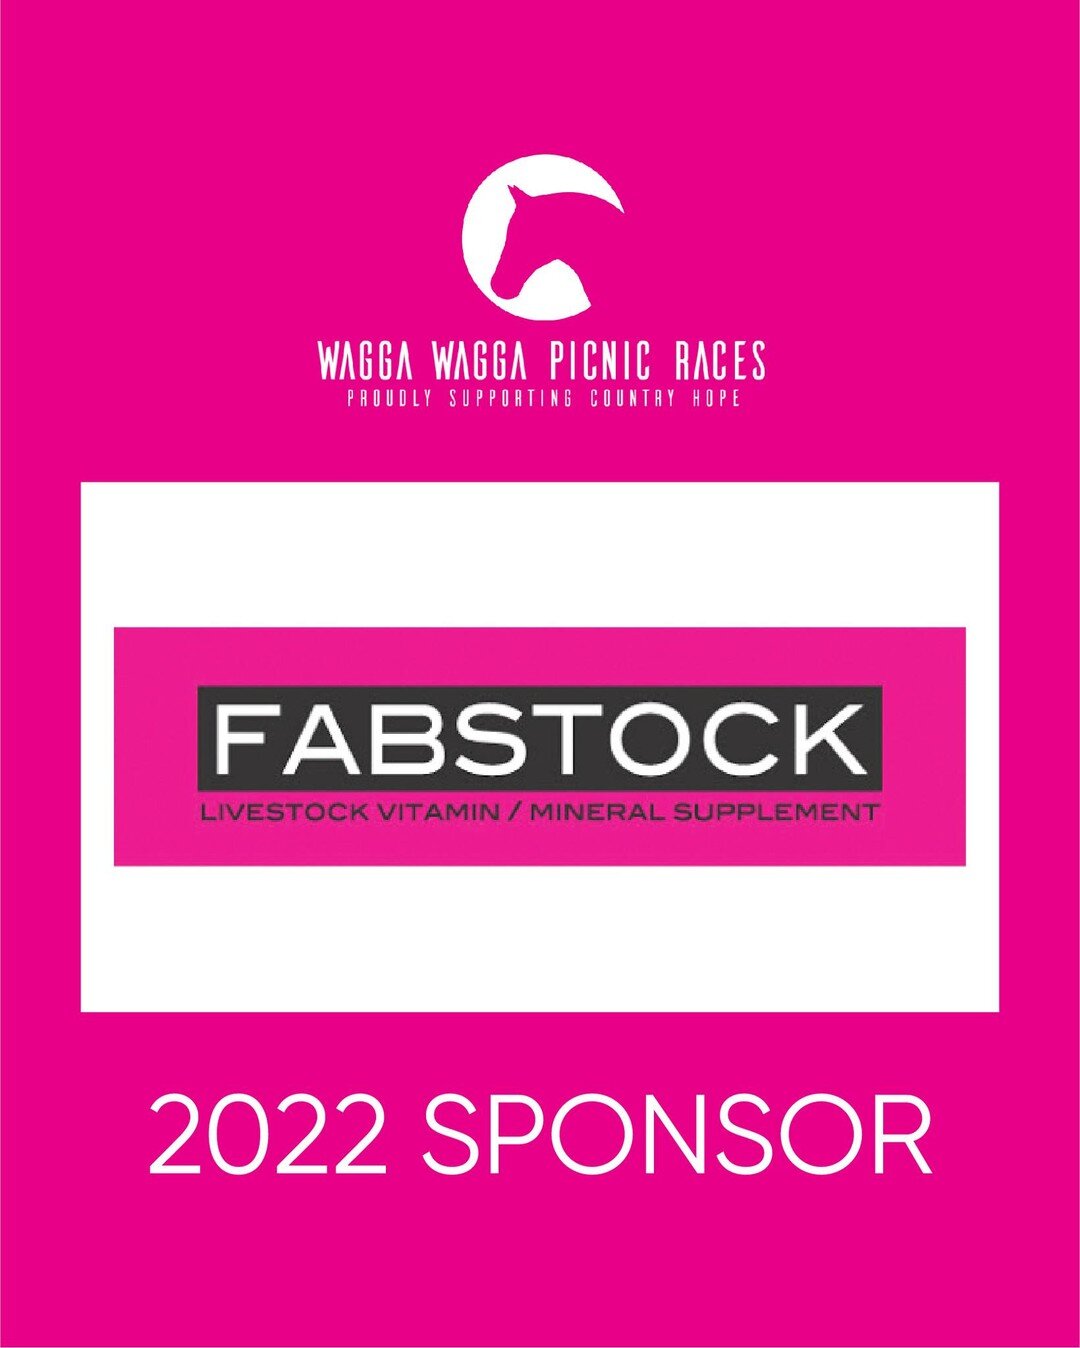 Wishing a huge thank you to one of our 2022 Sponsors, Fabstock!

Fabstock delivers quality livestock nutritional supplements to feed sheep and cattle all over Australia, and delivers producers real returns on their investment. A vitamin/mineral suppl